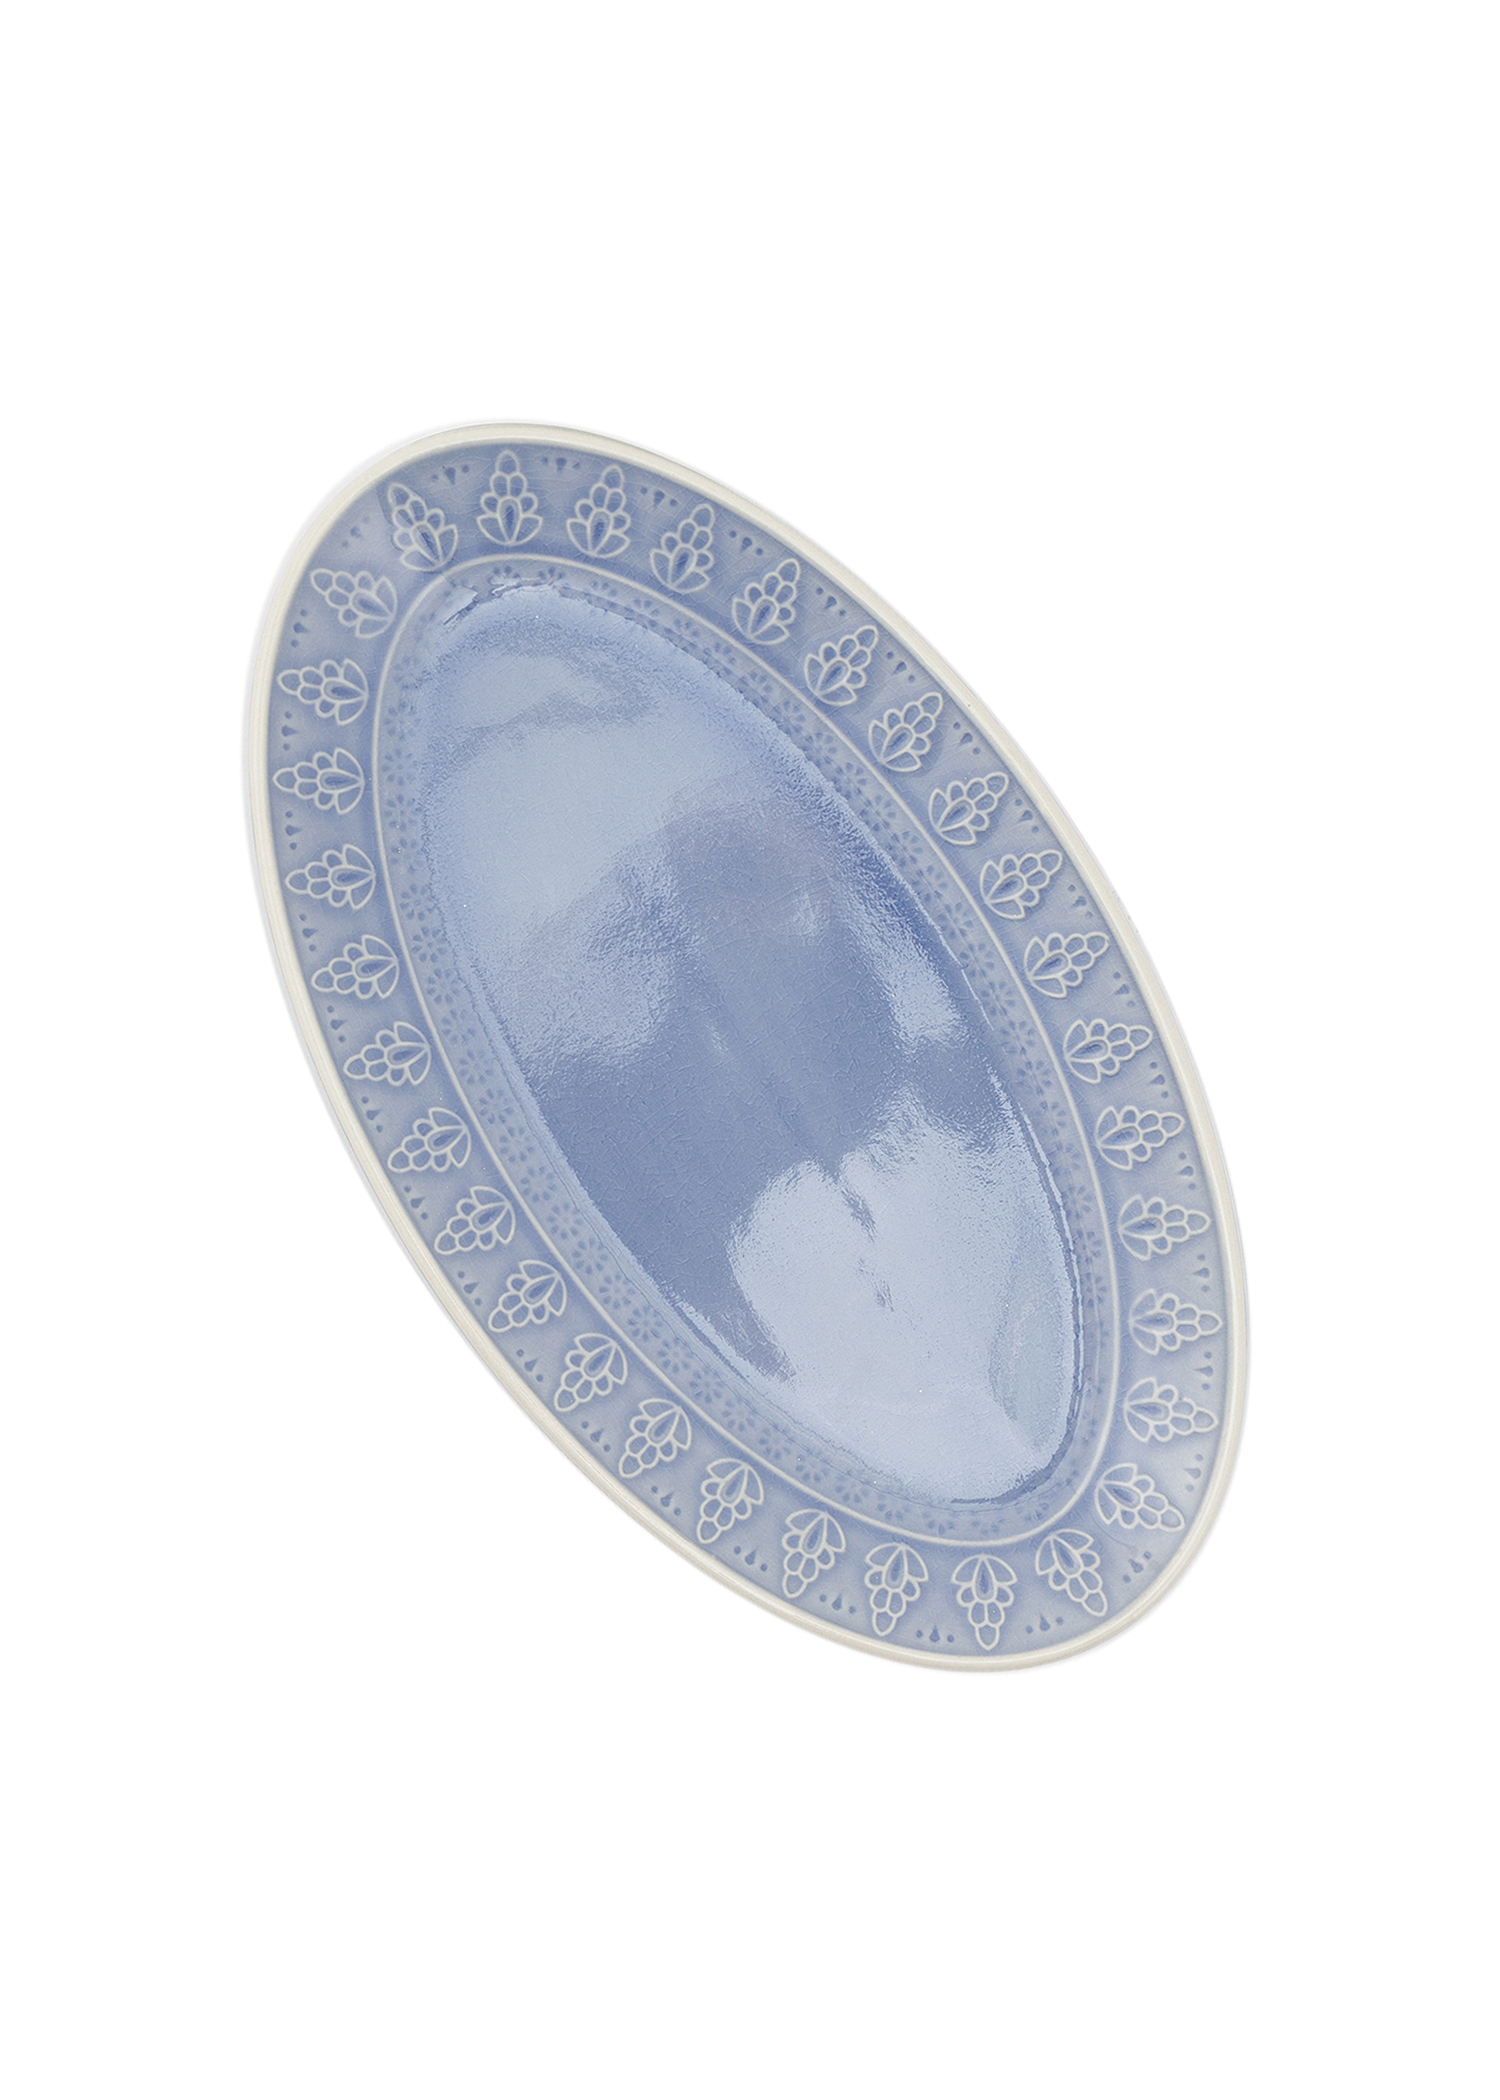 Stoneware oval serving plate Image 0